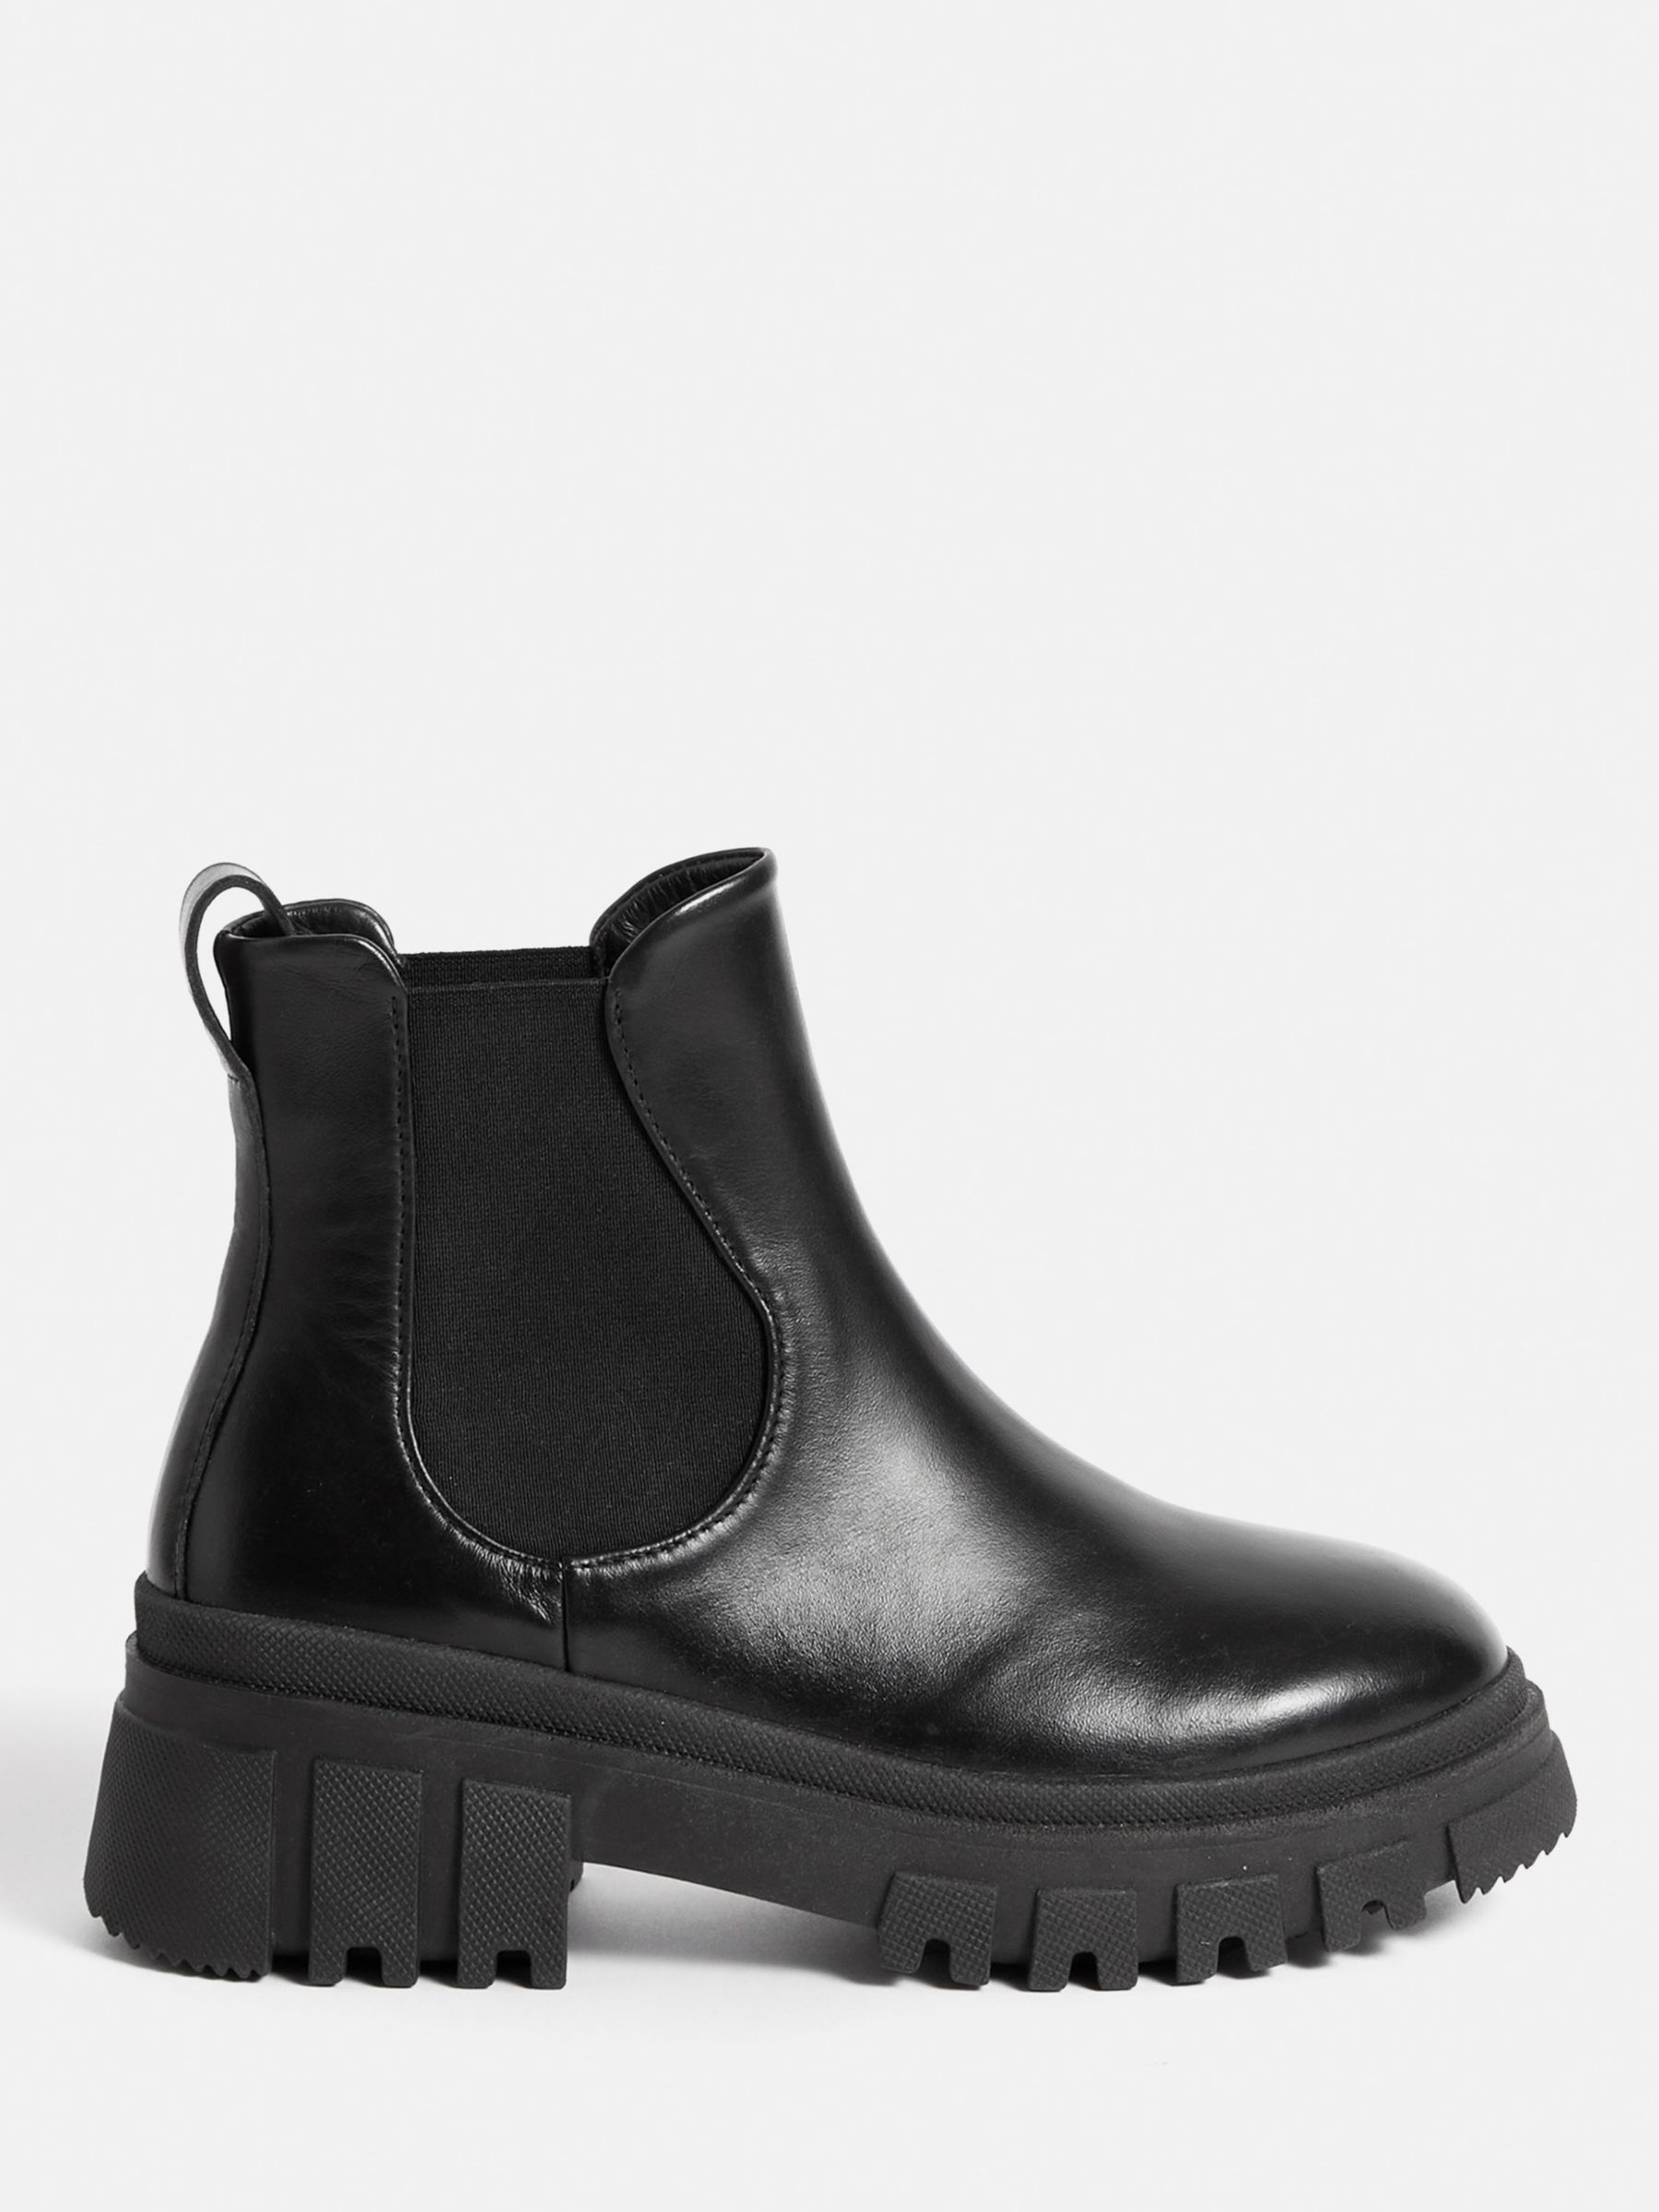 Jigsaw Yvie Gum Sole Leather Boots at John Lewis & Partners